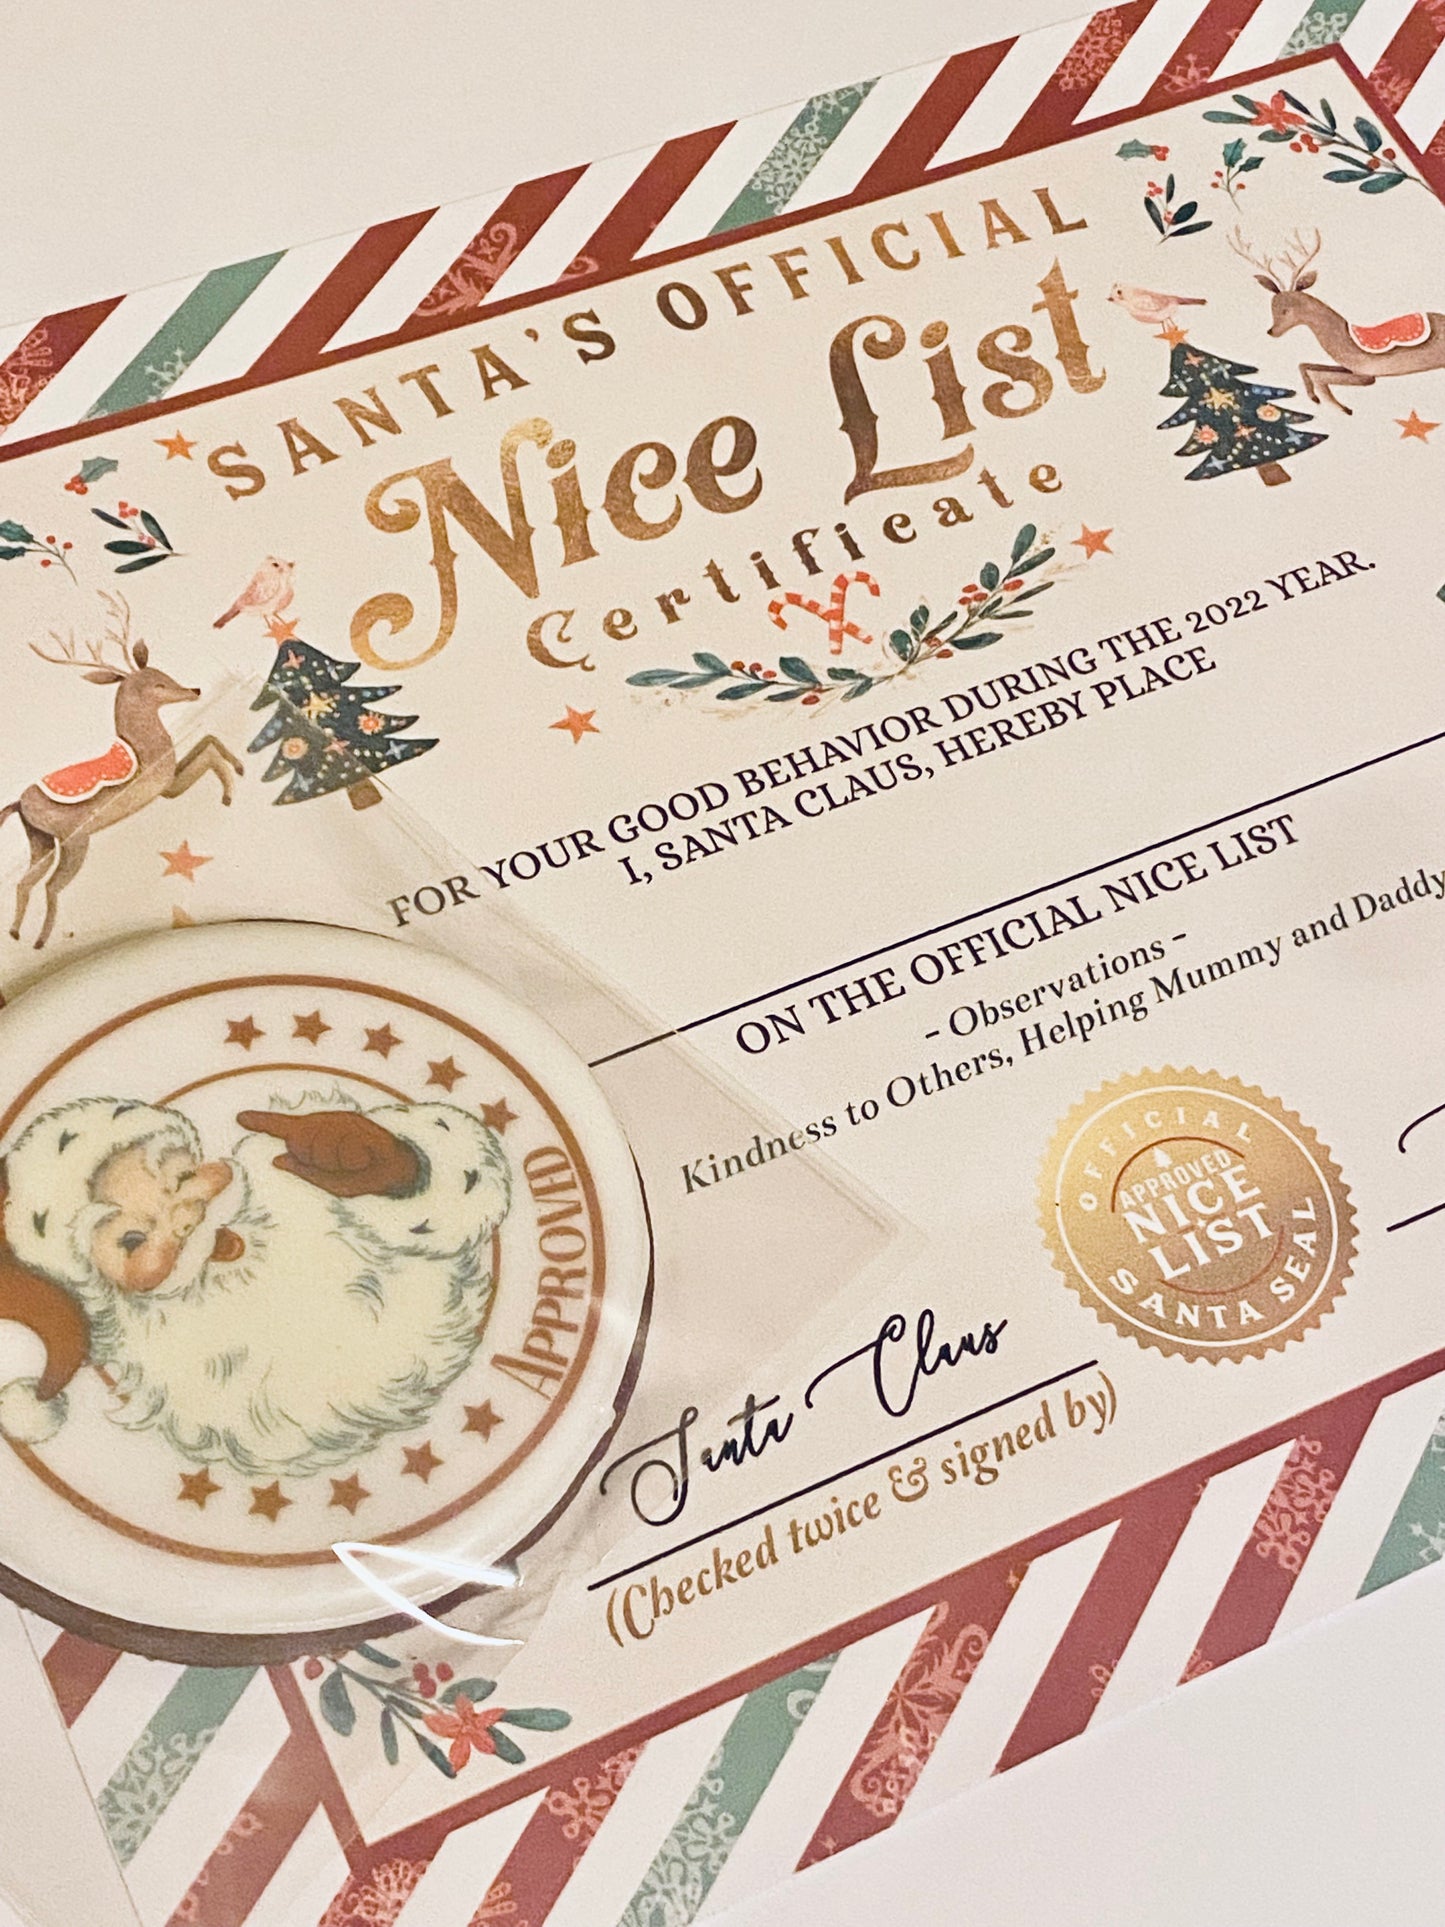 Nice List Biscuit (collection only)